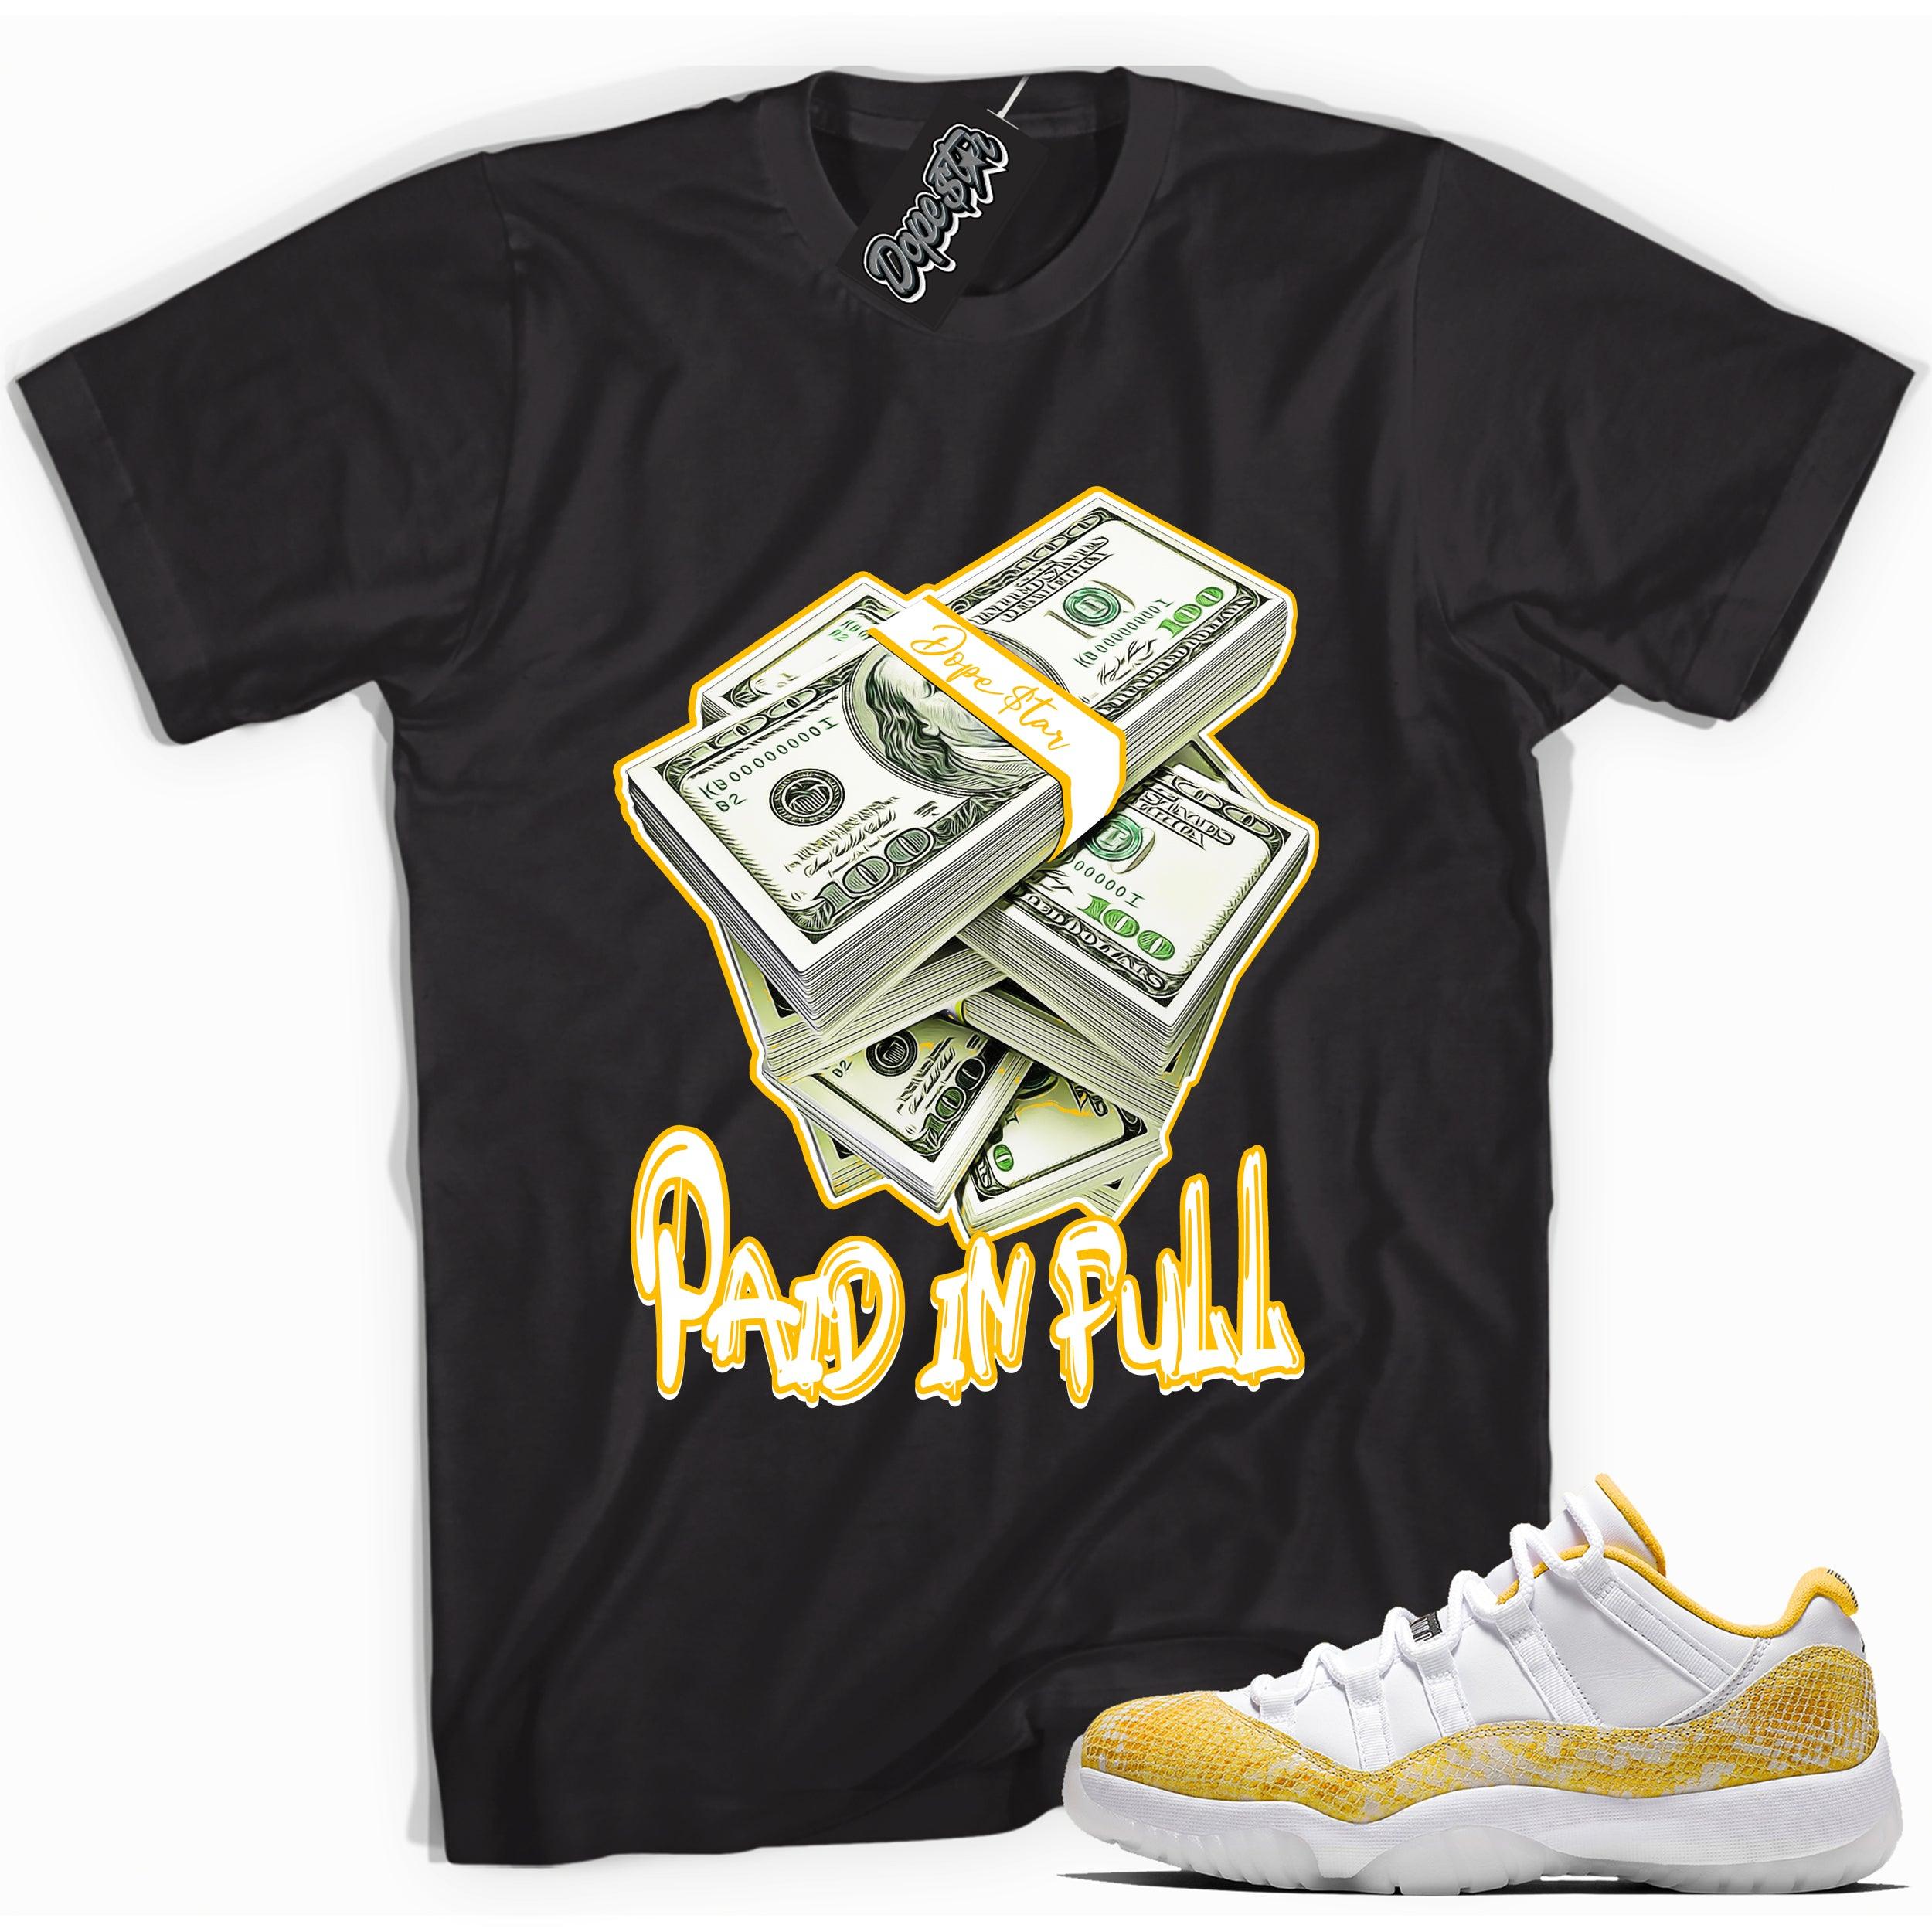 Cool black graphic tee with 'paid in full' print, that perfectly matches  Air Jordan 11 Retro Low Yellow Snakeskin sneakers